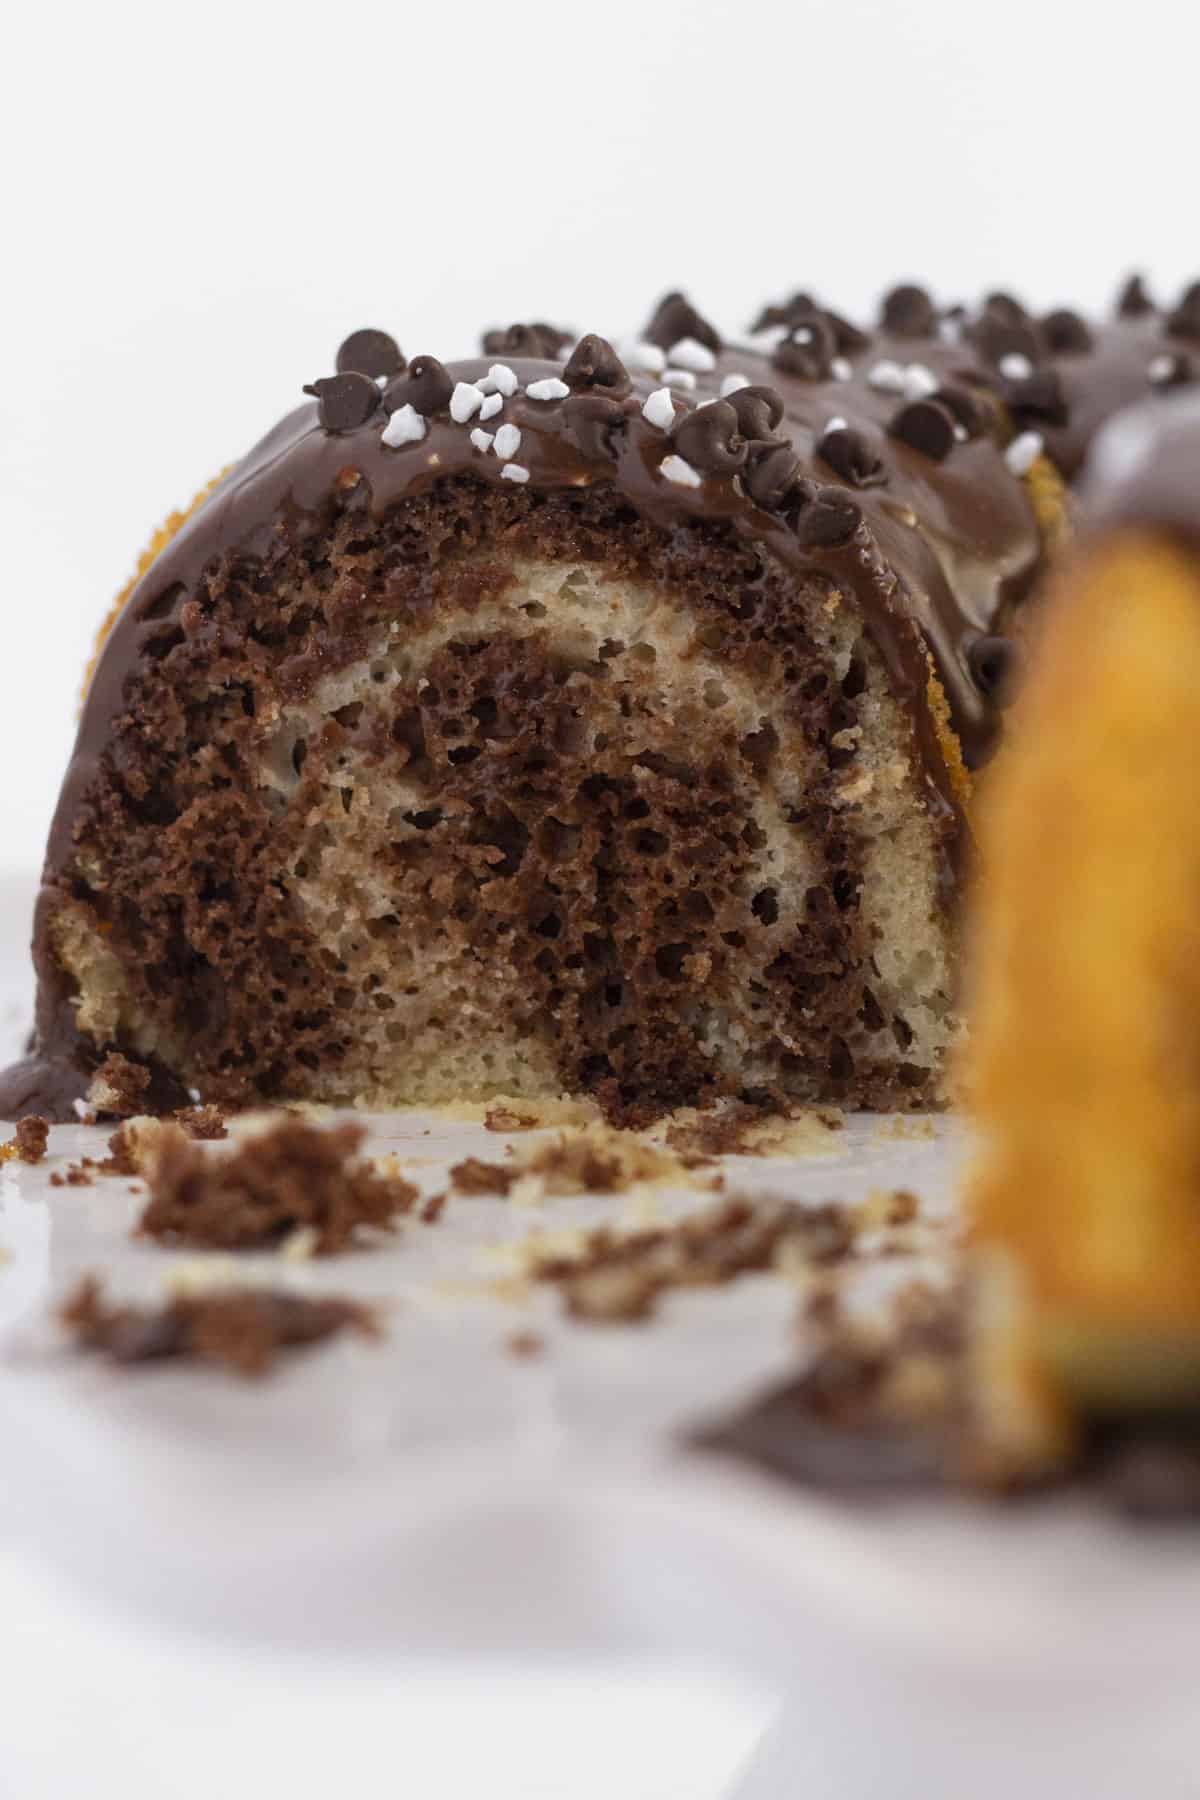 Looking inside a chocolate and vanilla marble cake.